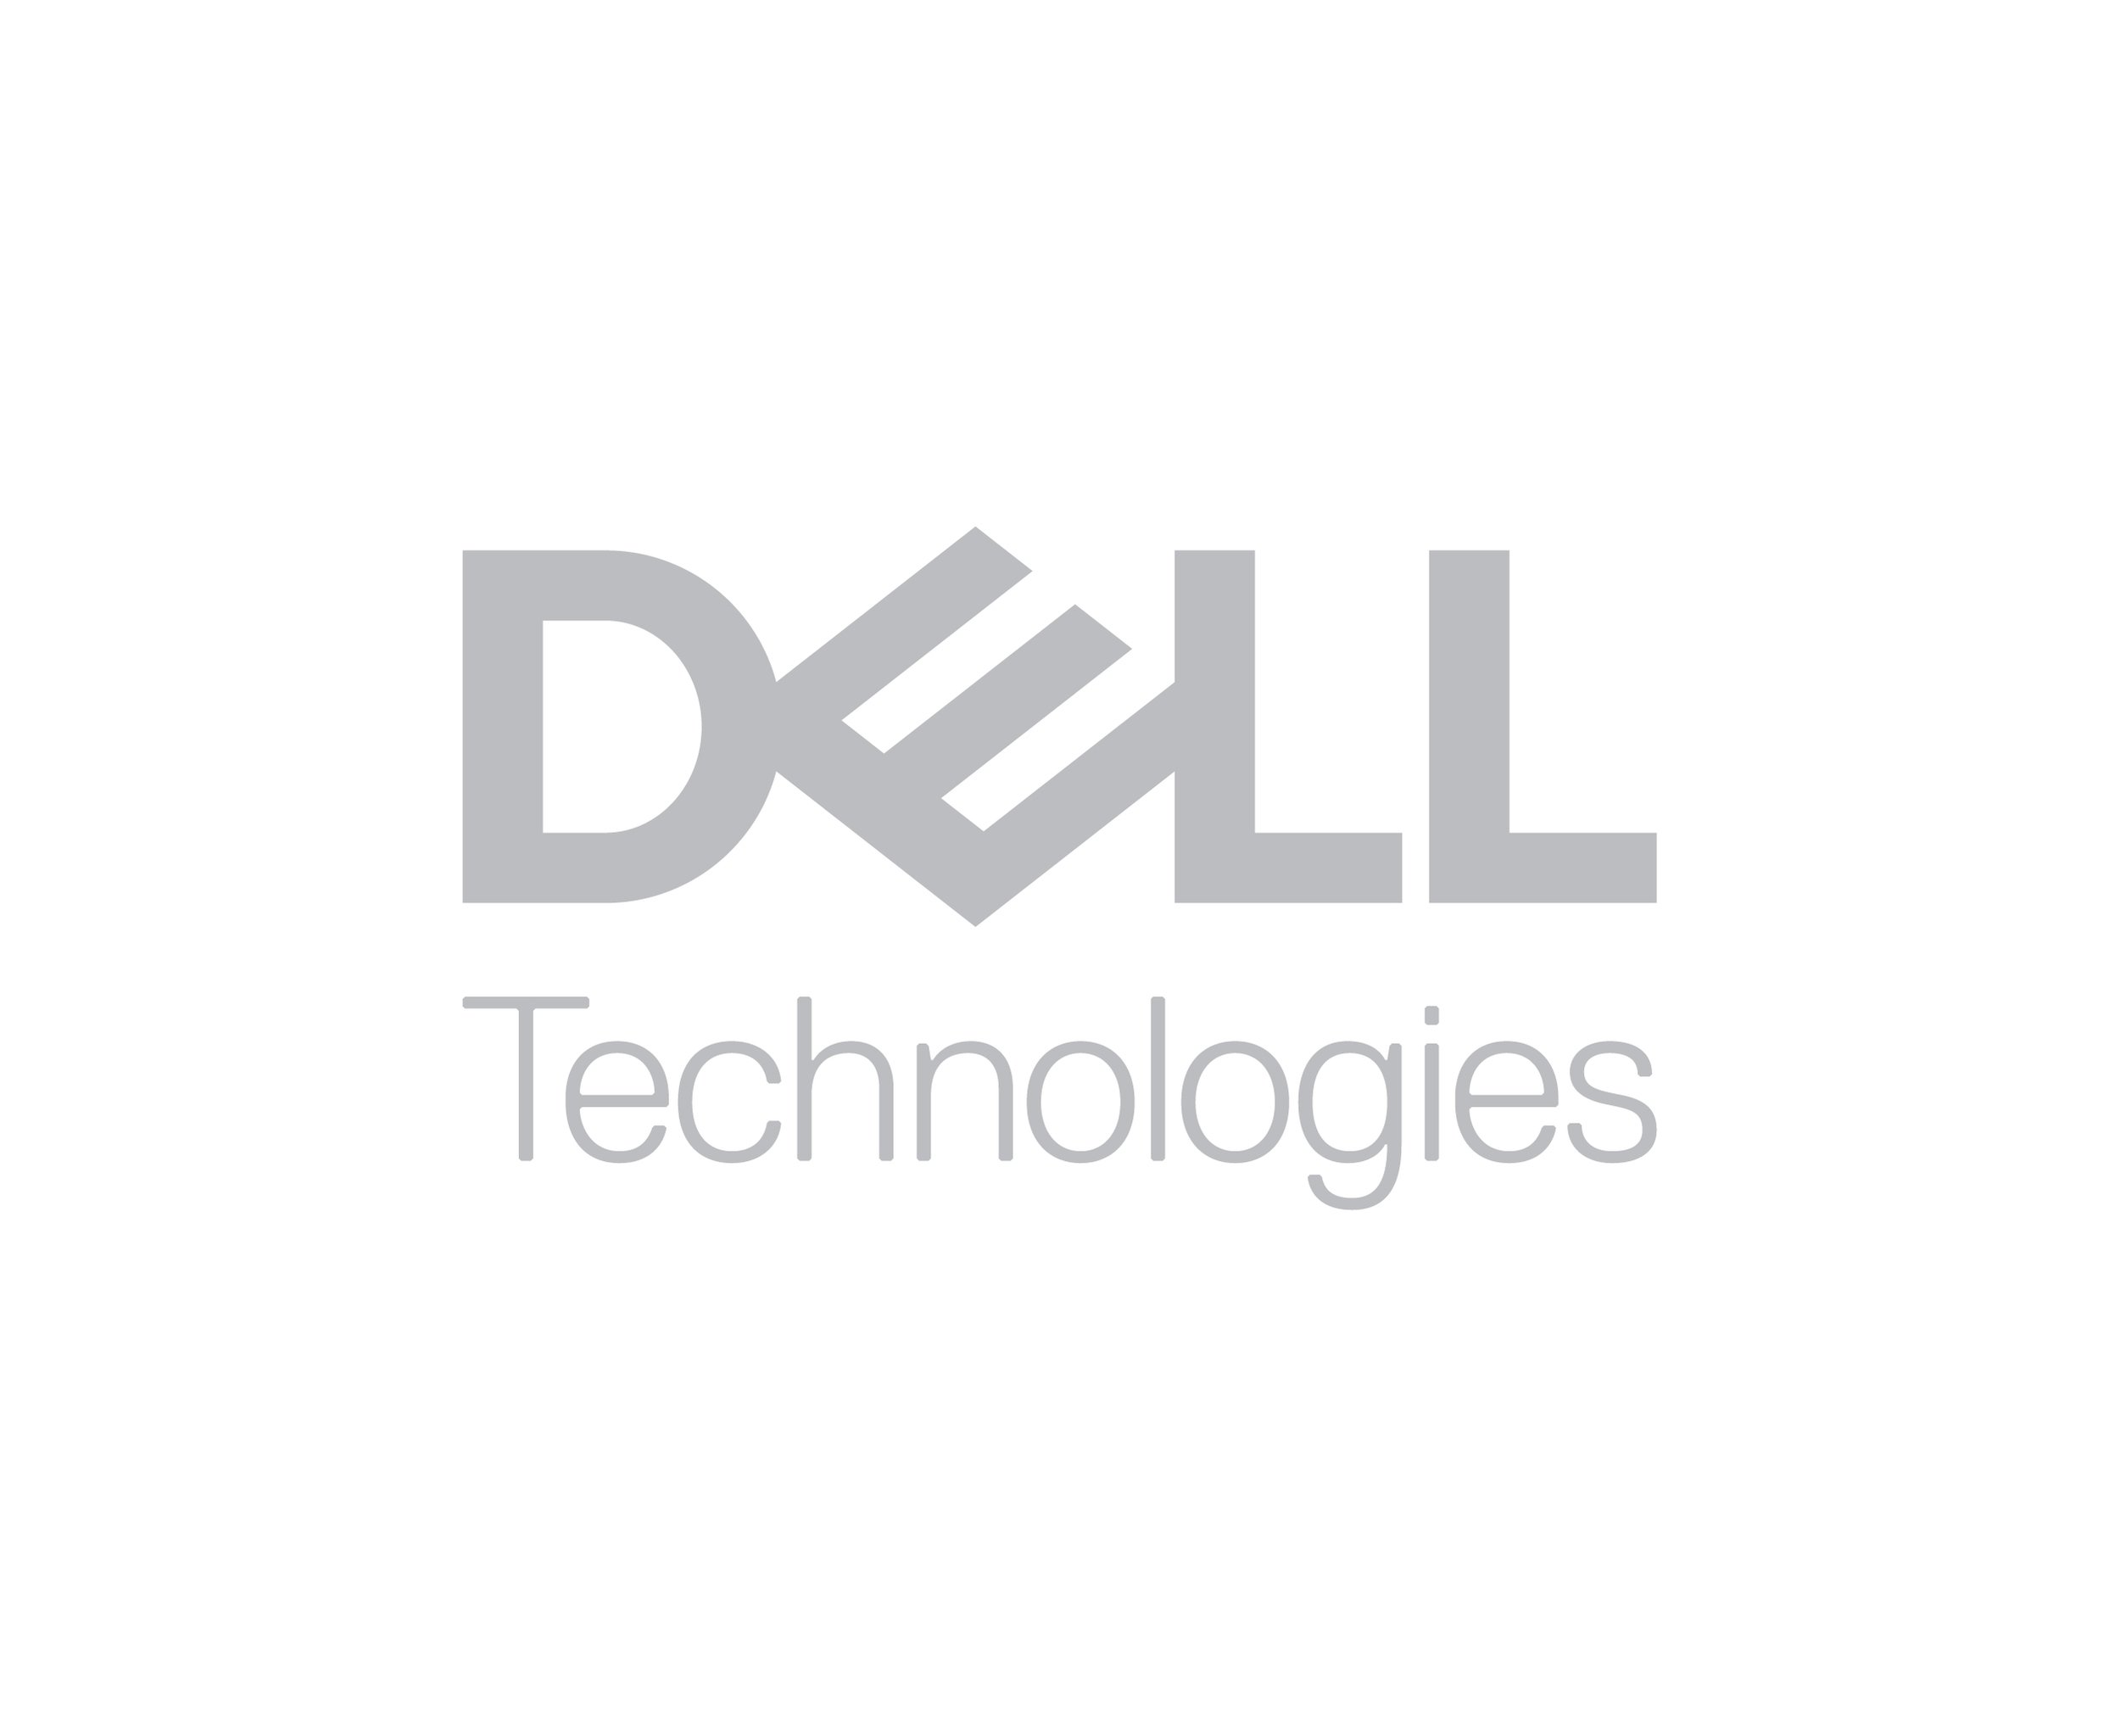 dell technologies live screen printing